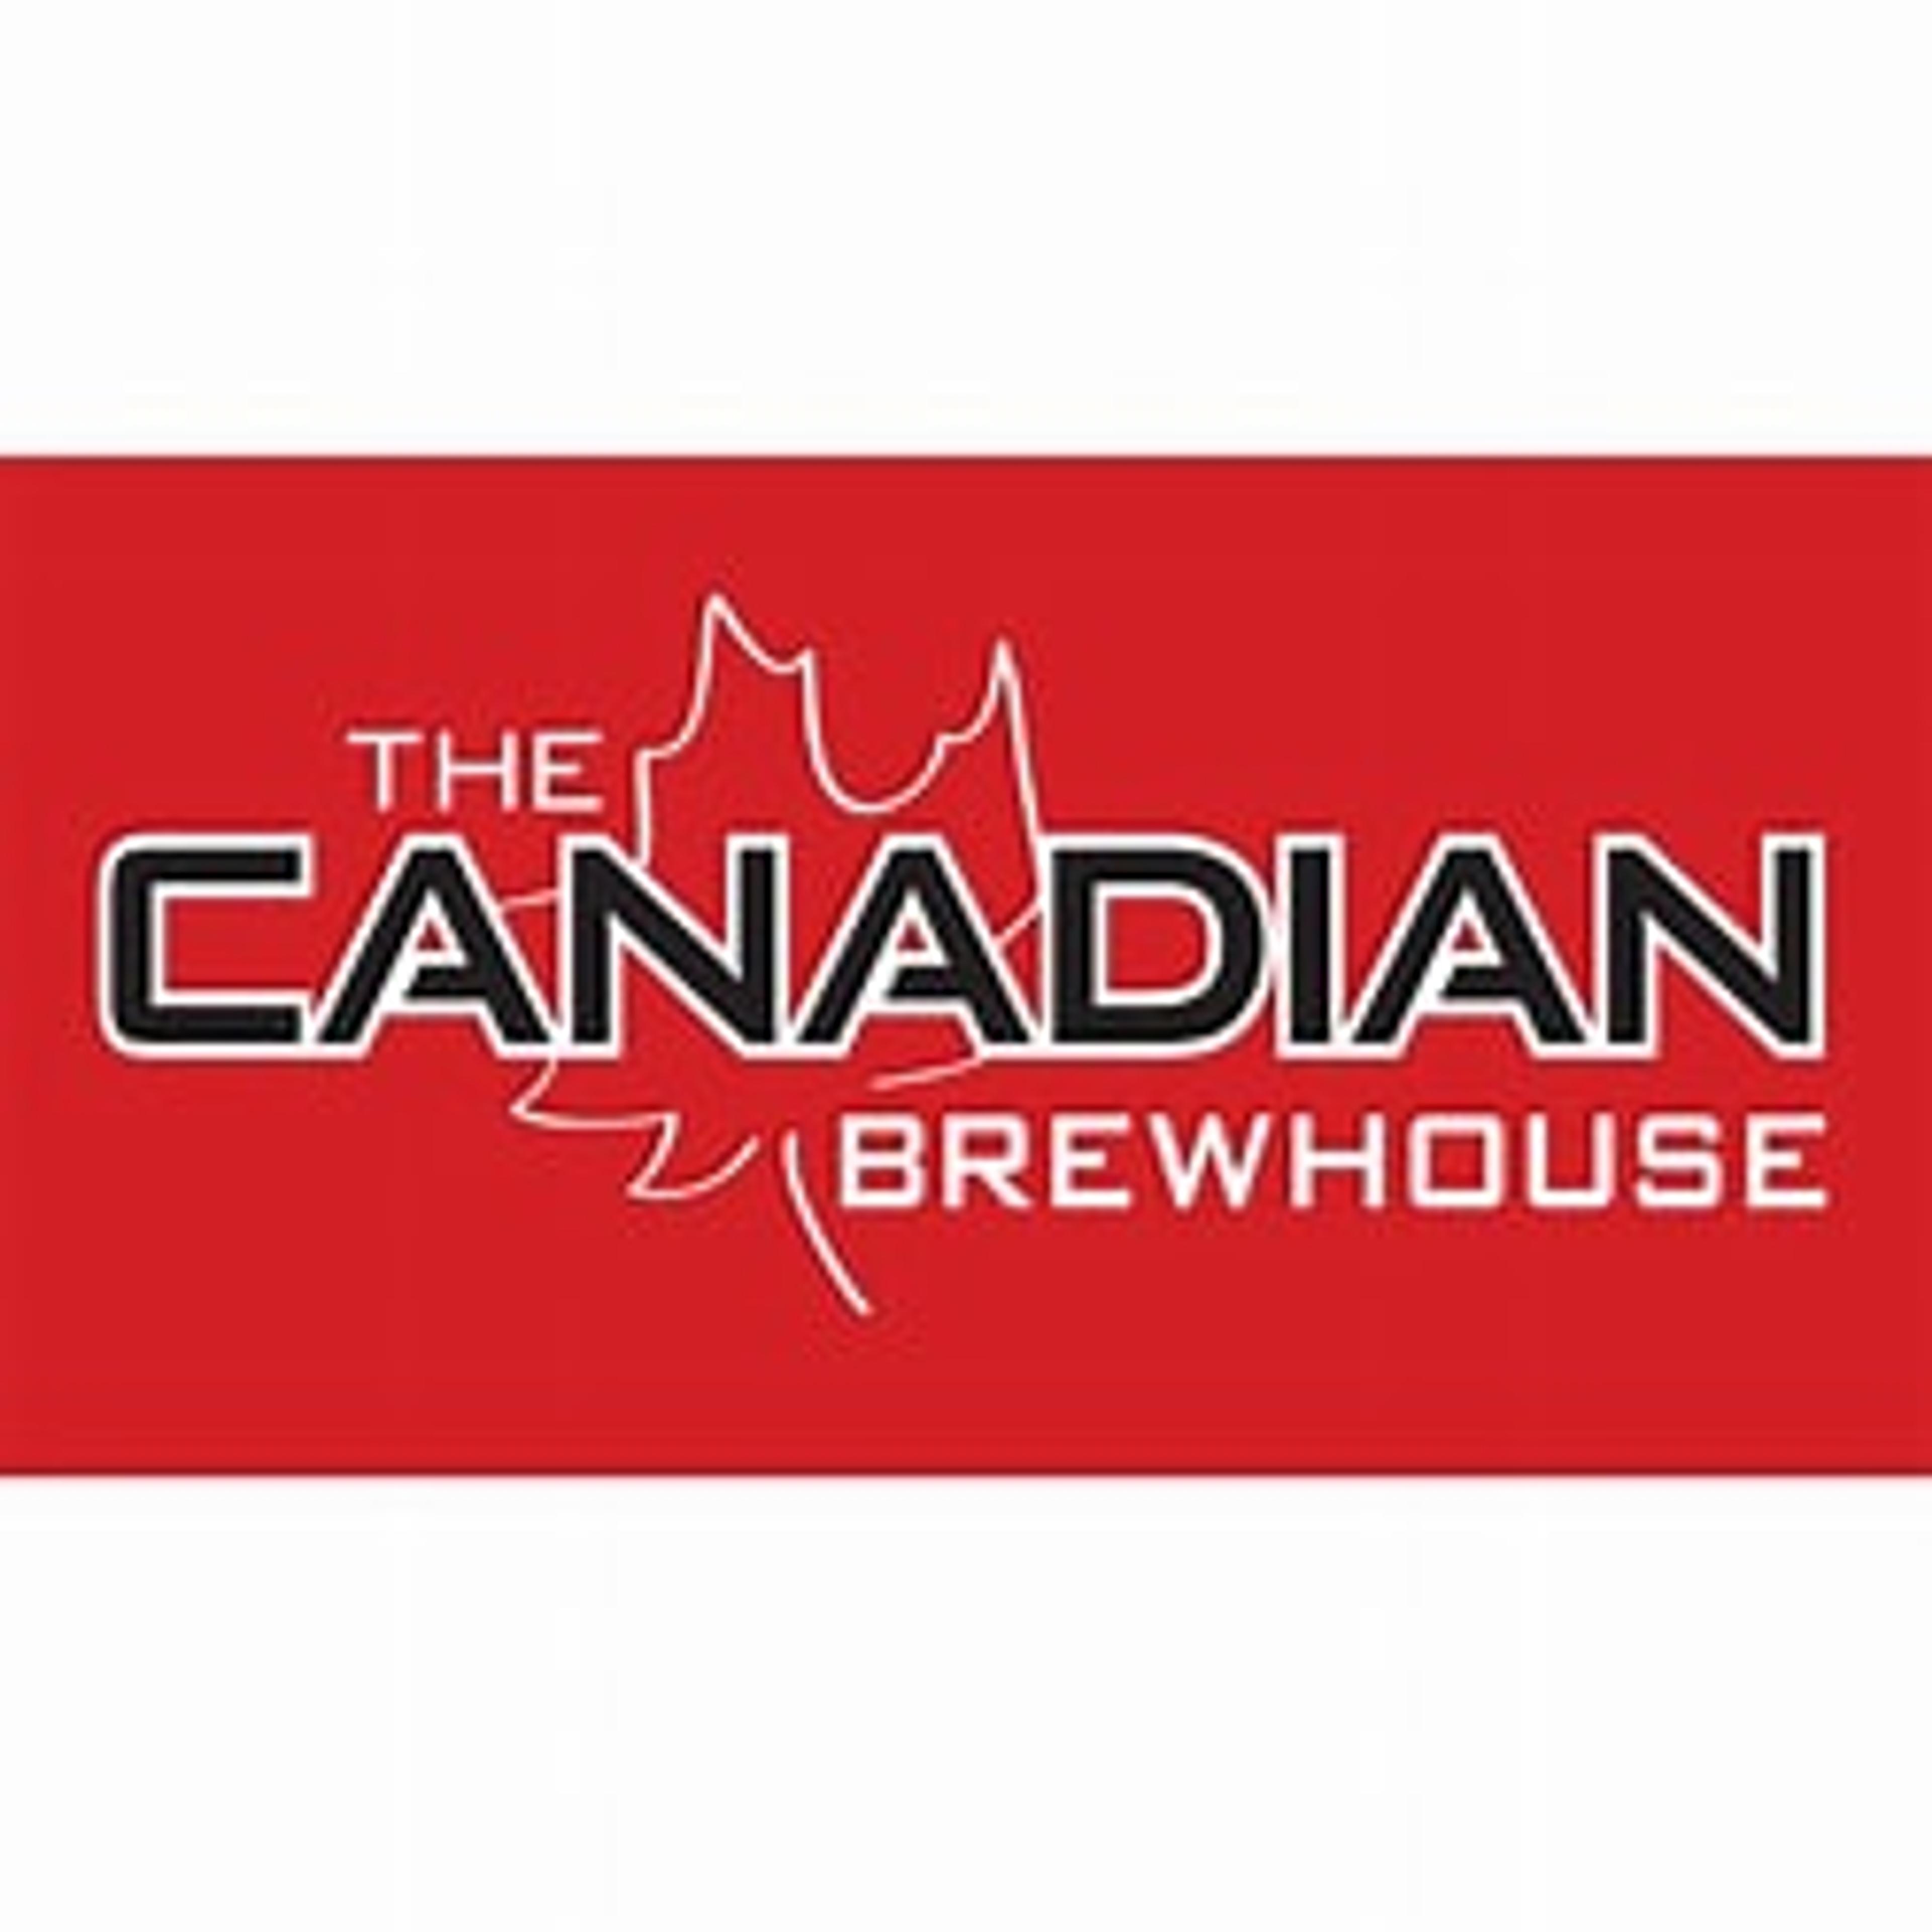 The Canadian Brewhouse logo